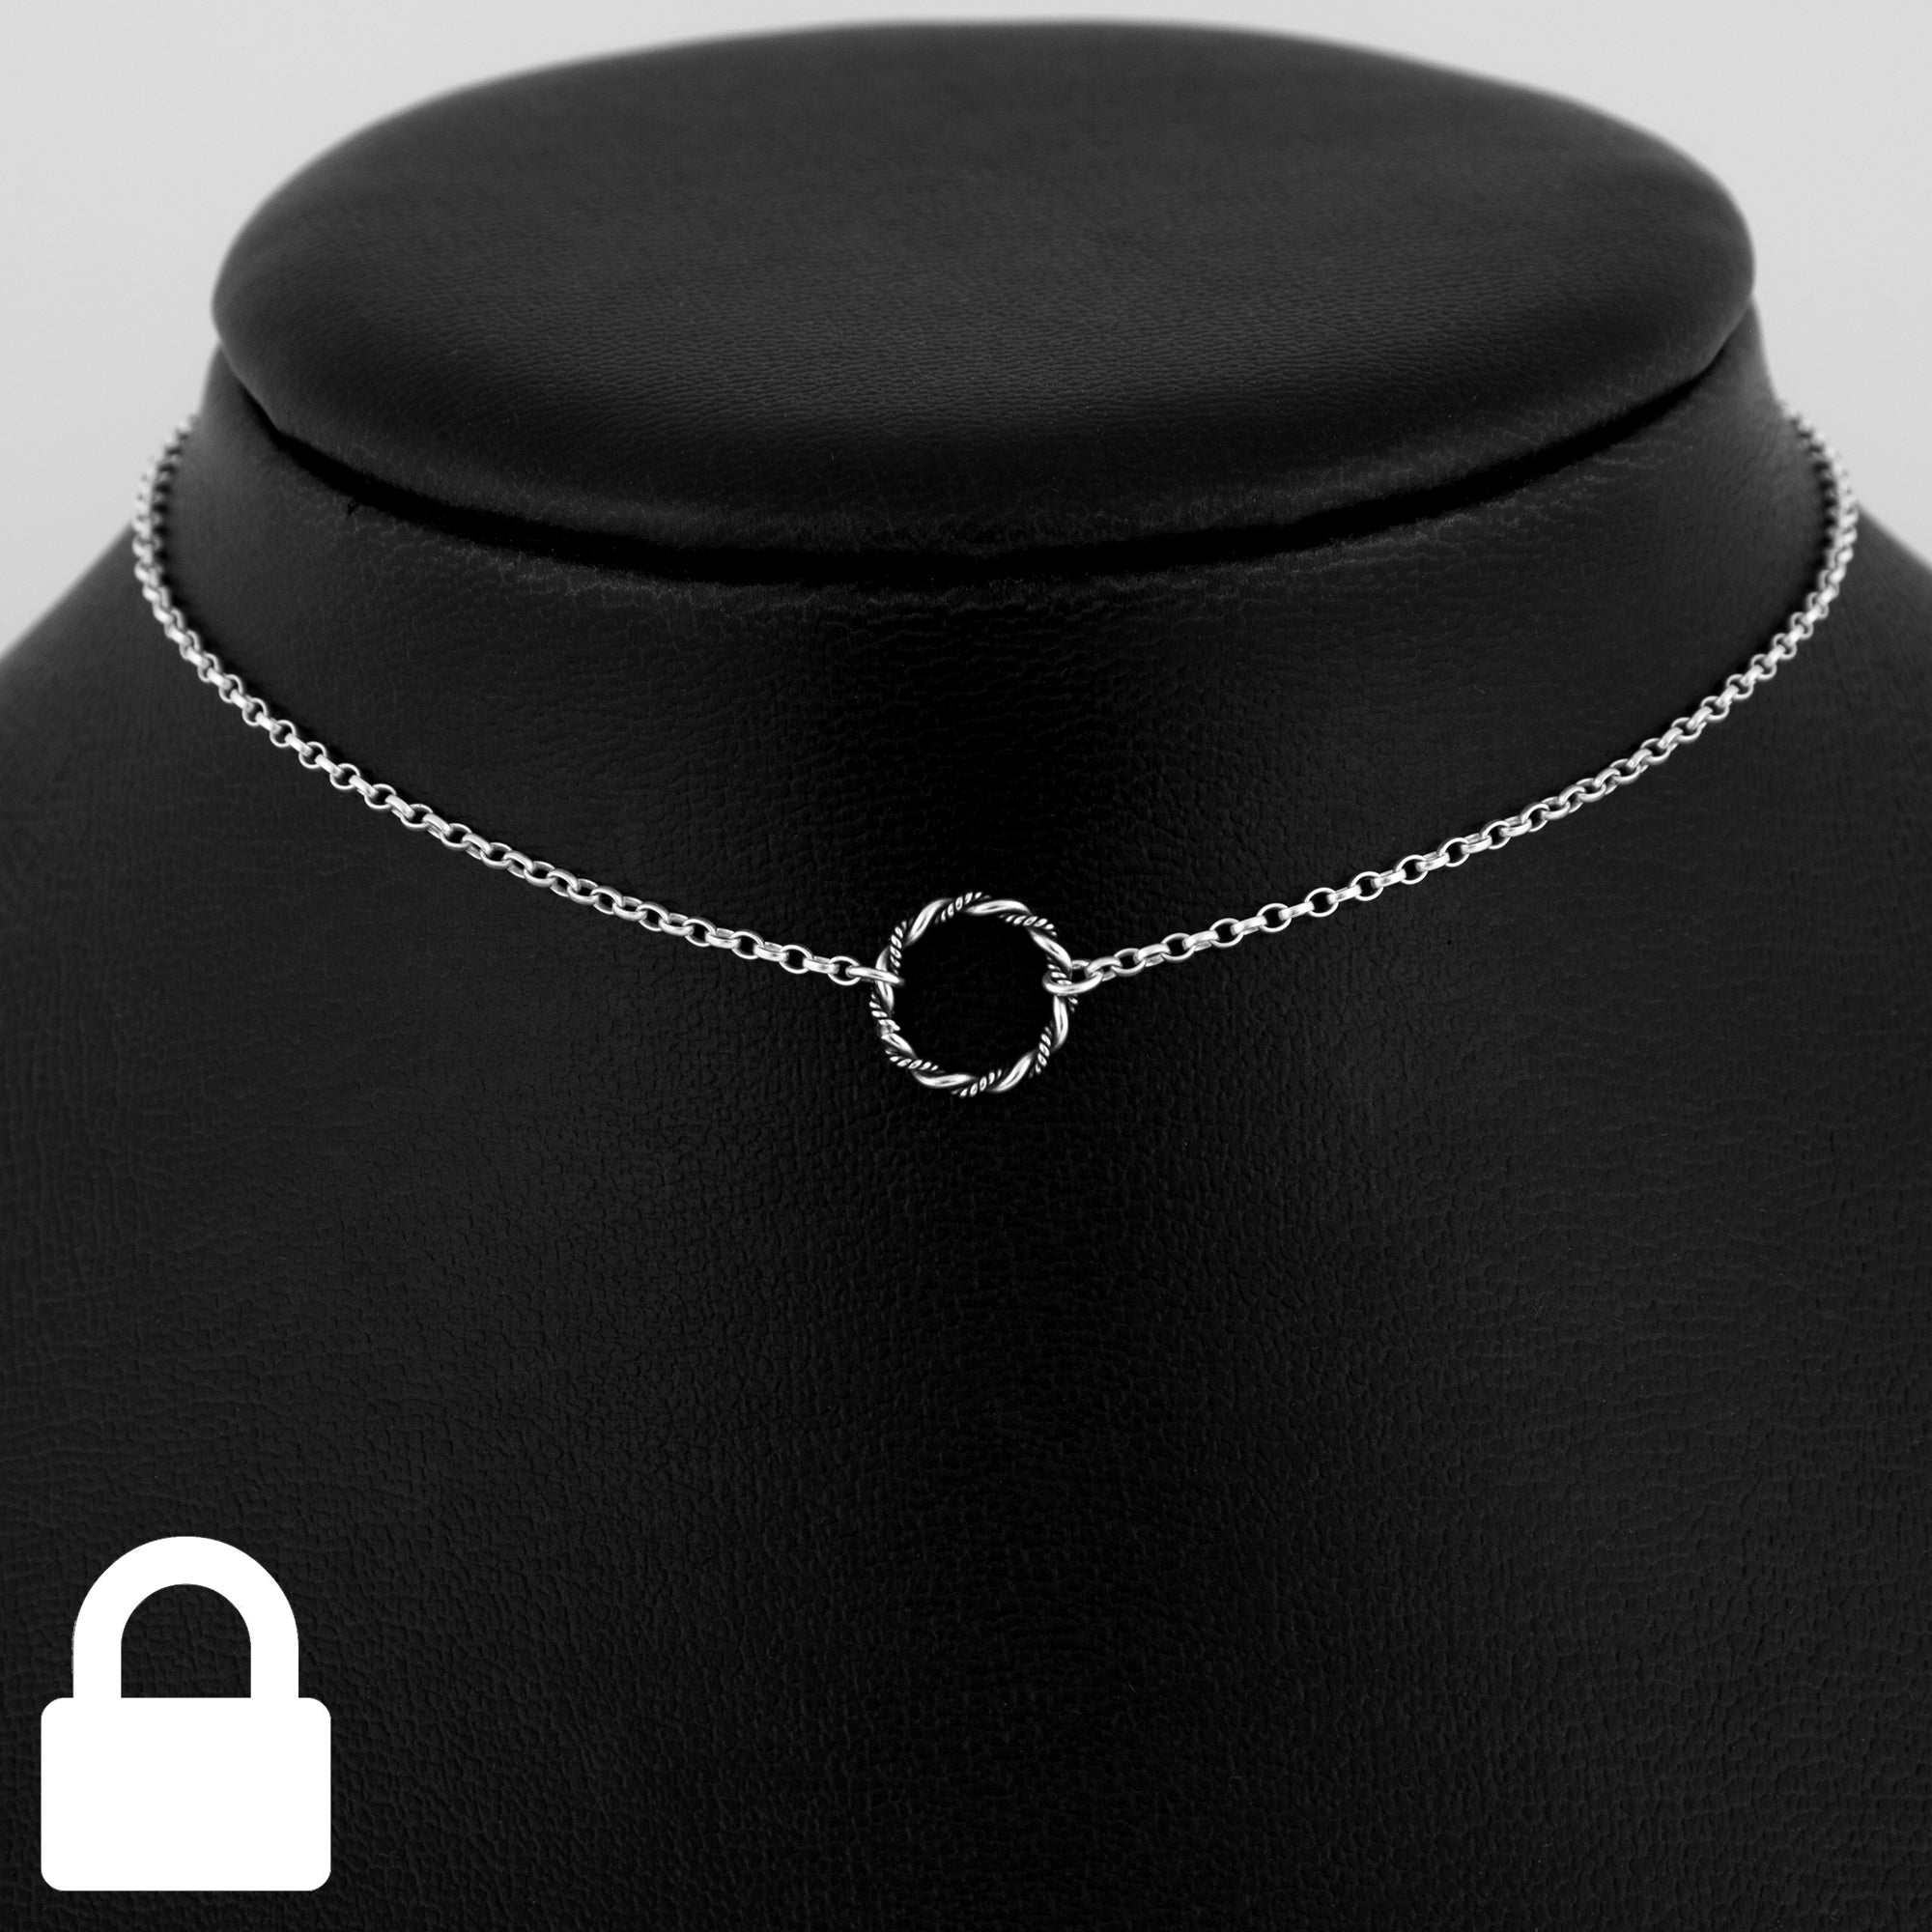 Eternally Loved - Discrete PERMANENTLY LOCKING Heart shaped O ring Day  Collar / Slave Necklace. Sterling silver. BDSM collar/choker/necklace